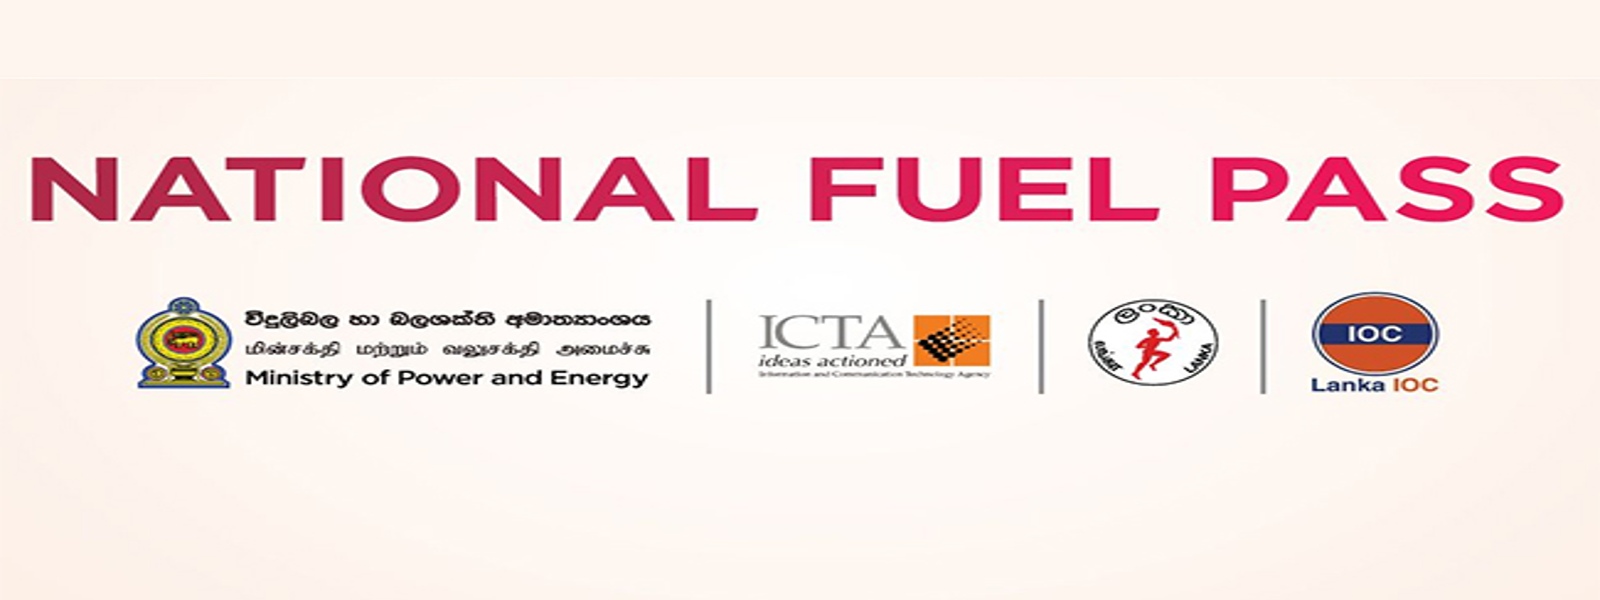 ONLY use ICTA link to register for Fuel Pass